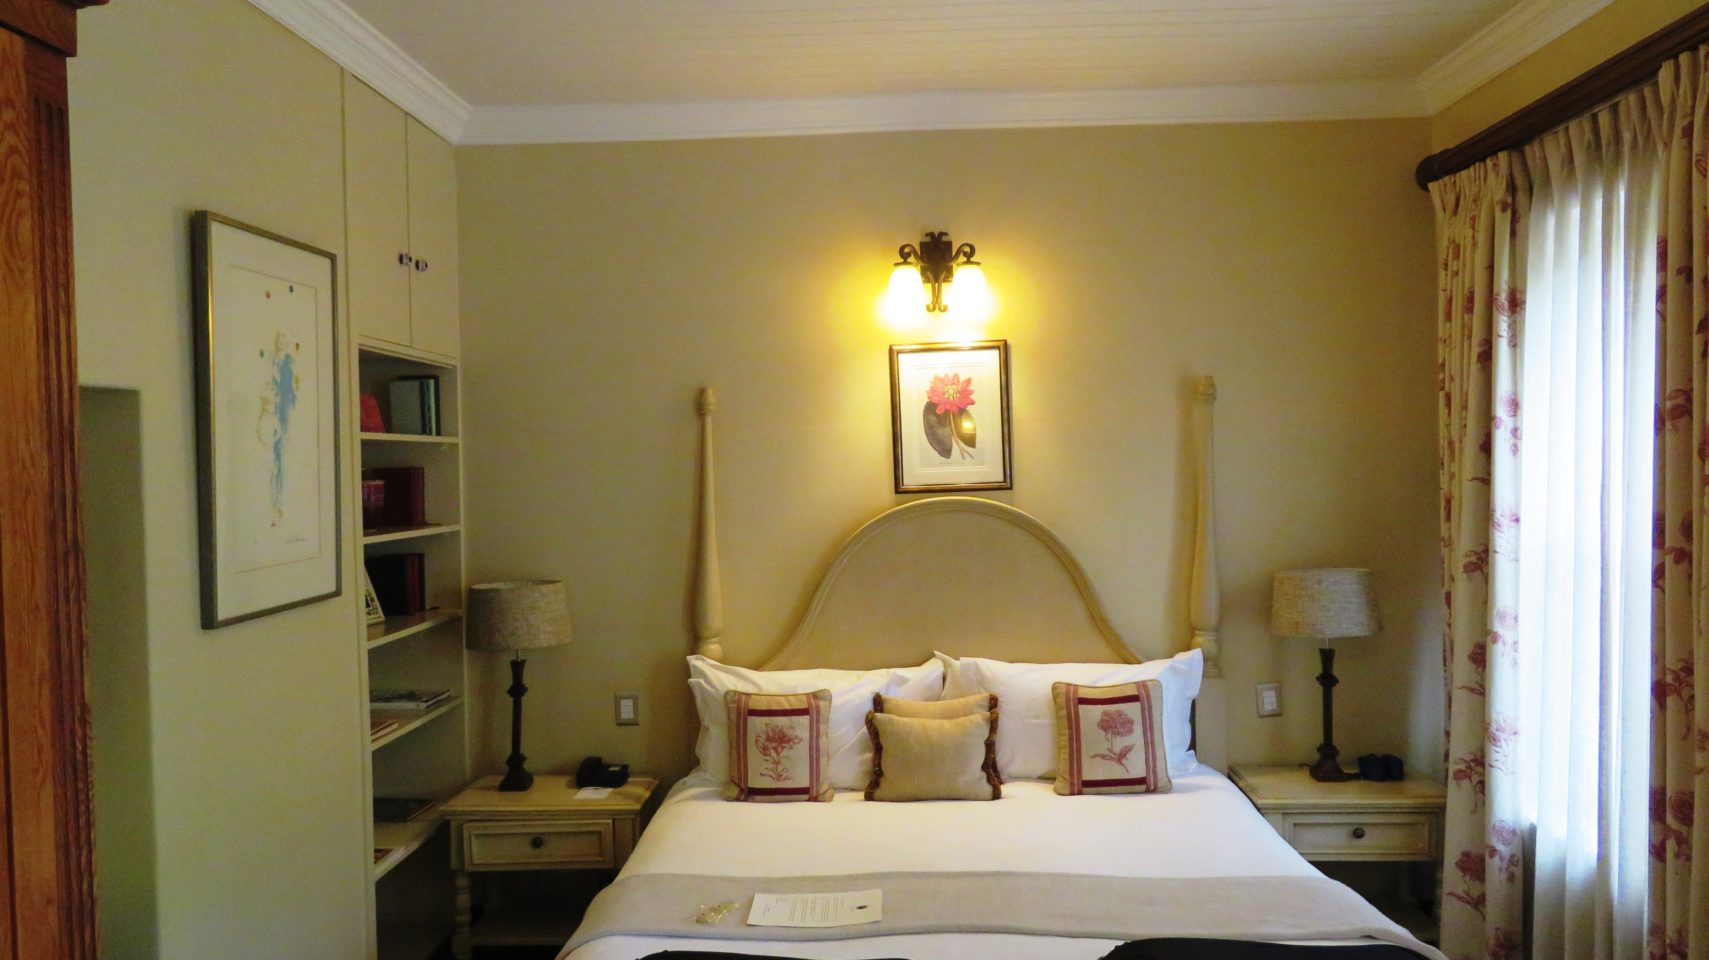 Our guestroom at the Coopmanhuijs Boutique Hotel & Spa